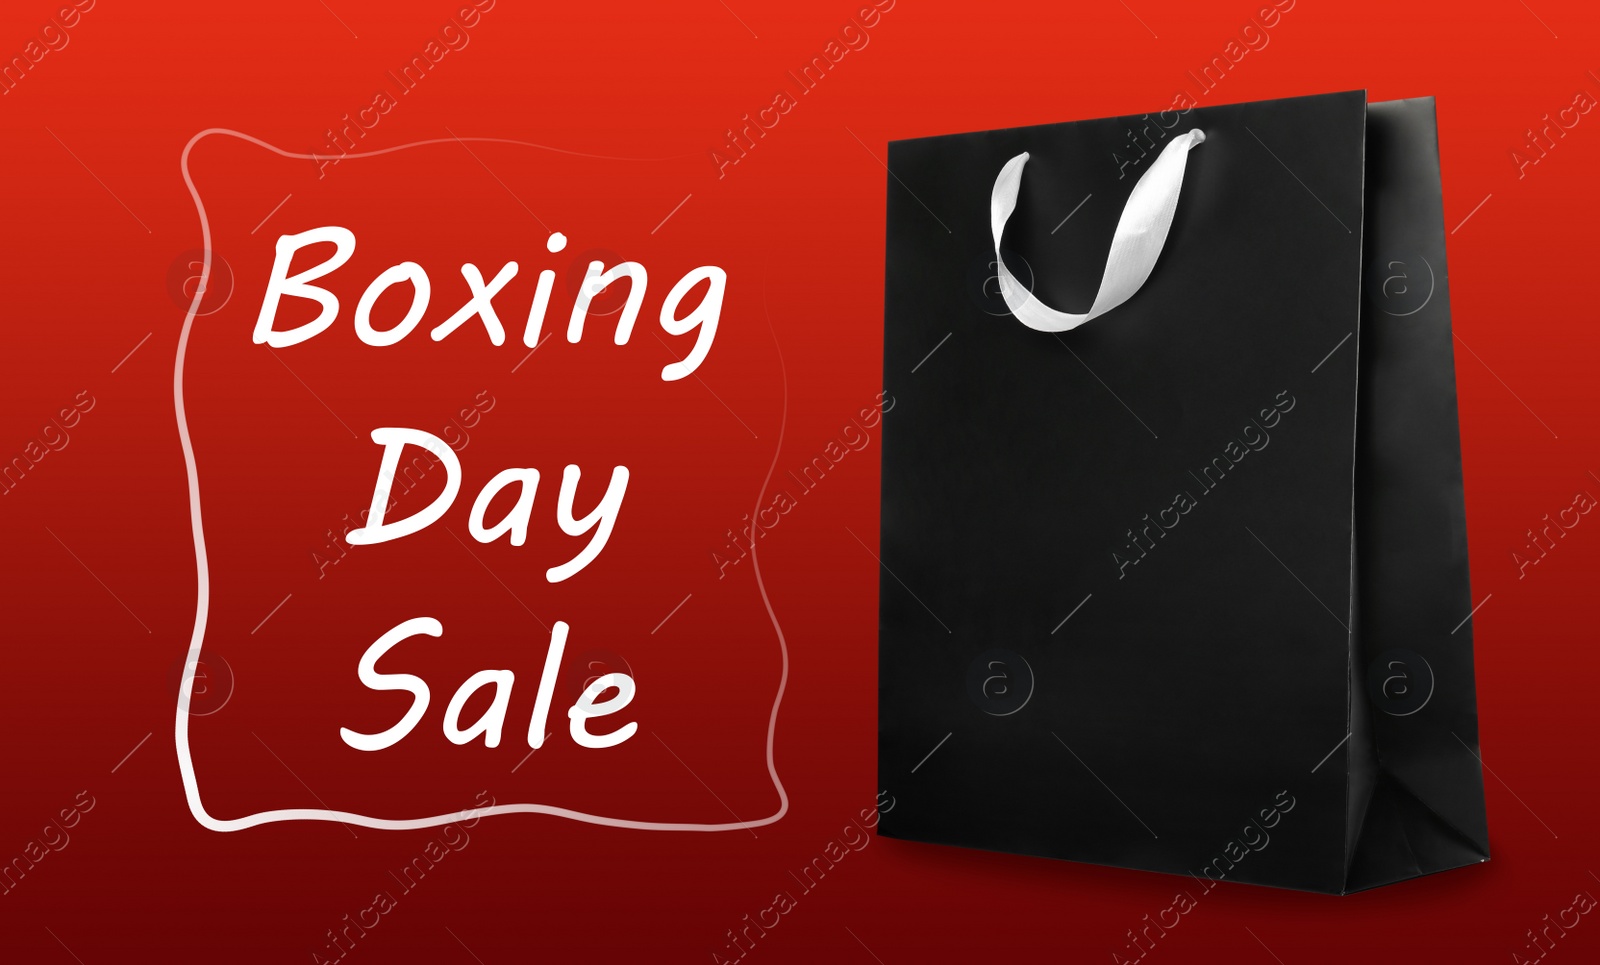 Image of Boxing day sale. Shopping bag on red background